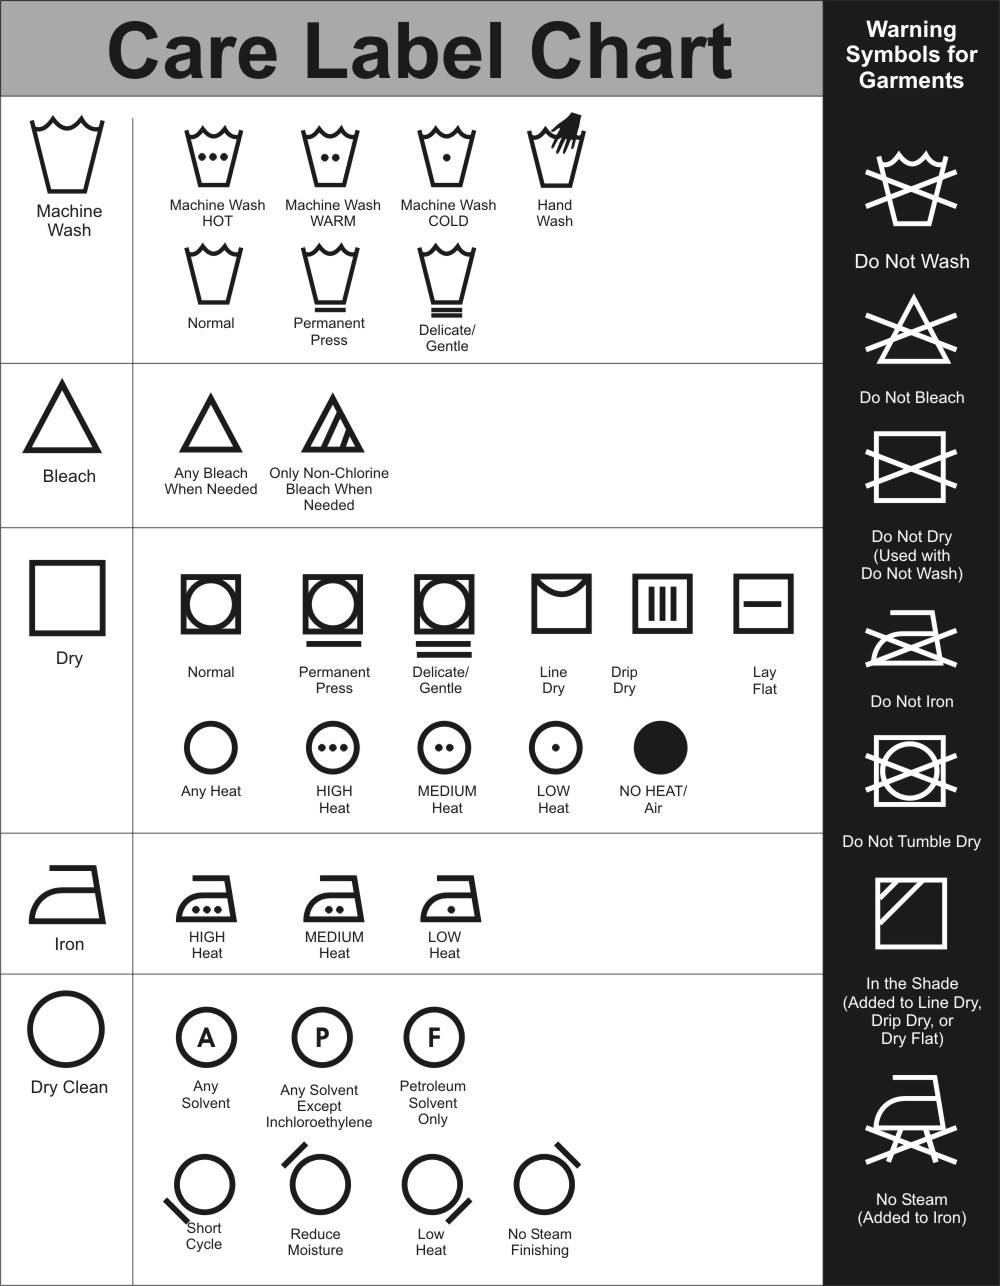 dry cleaning symbols - meaning